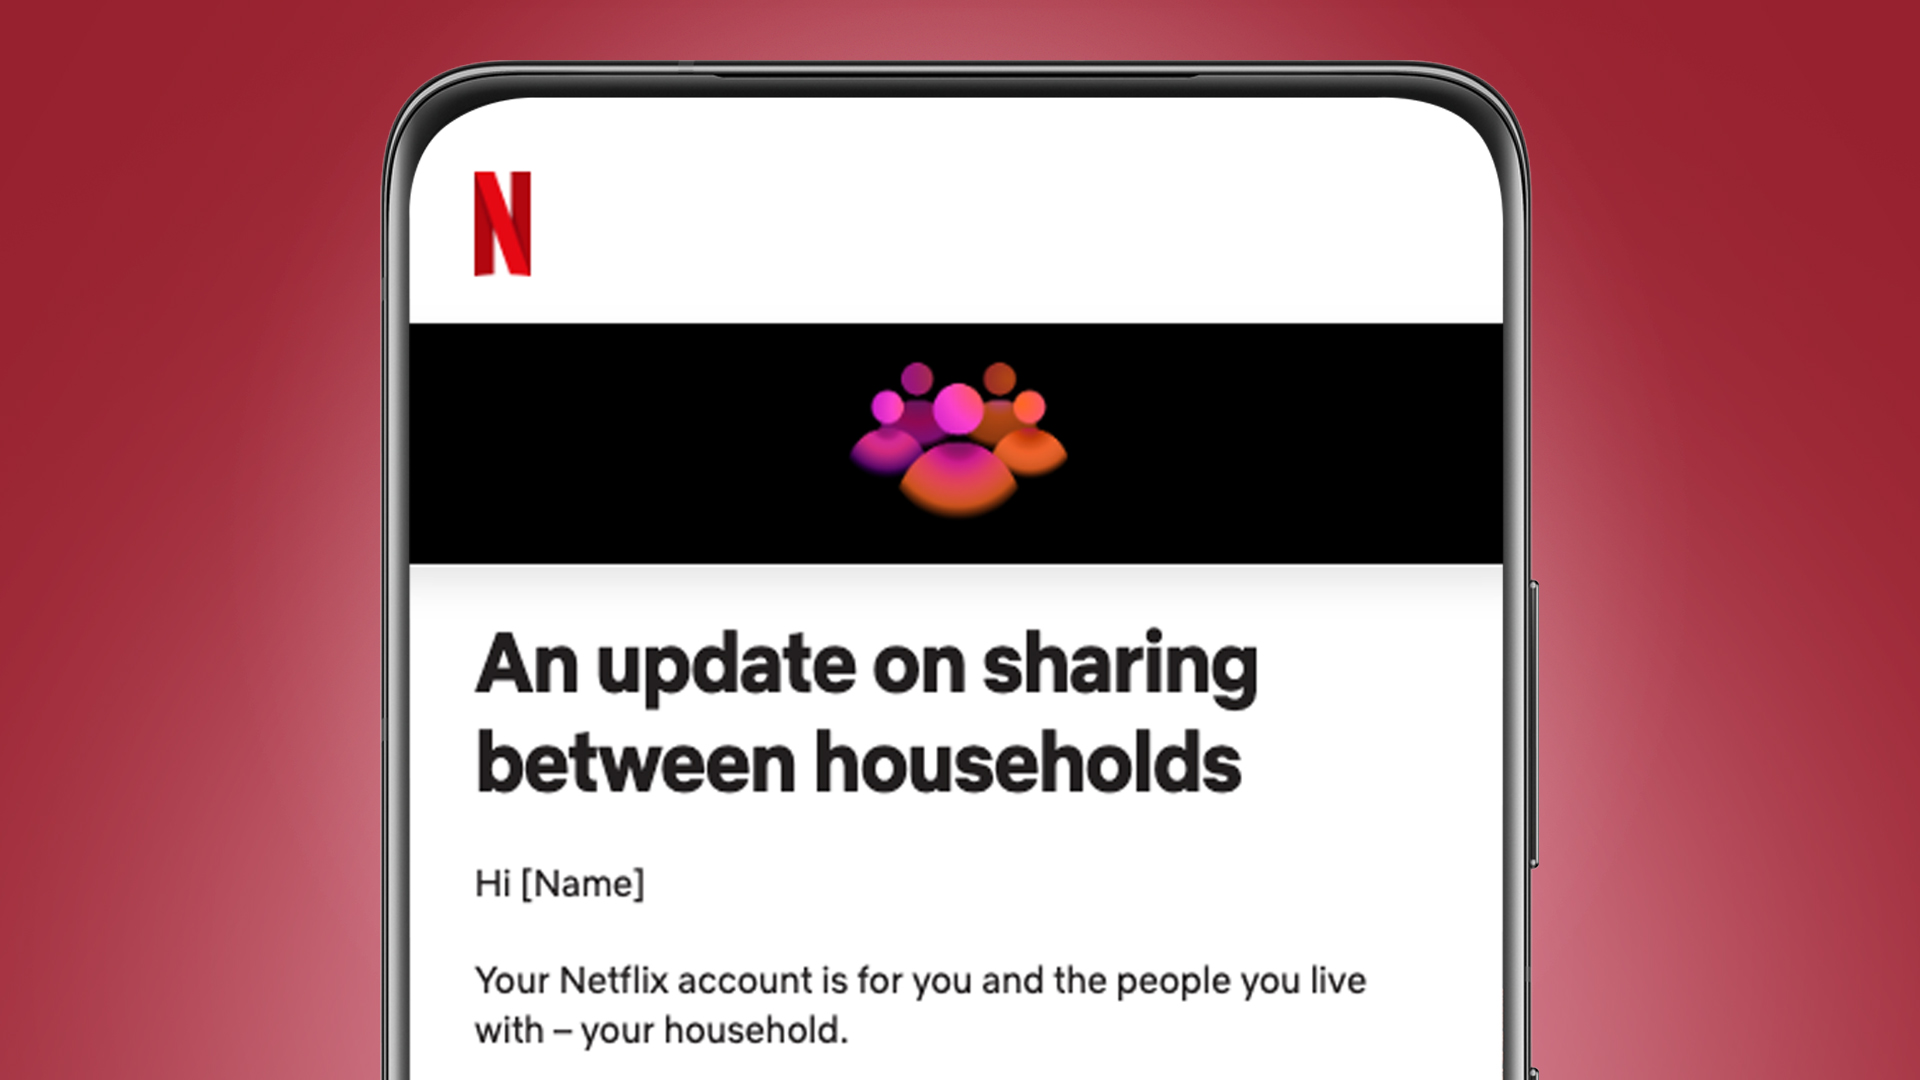 Netflix begins crackdown sharing logins with monthly fee per